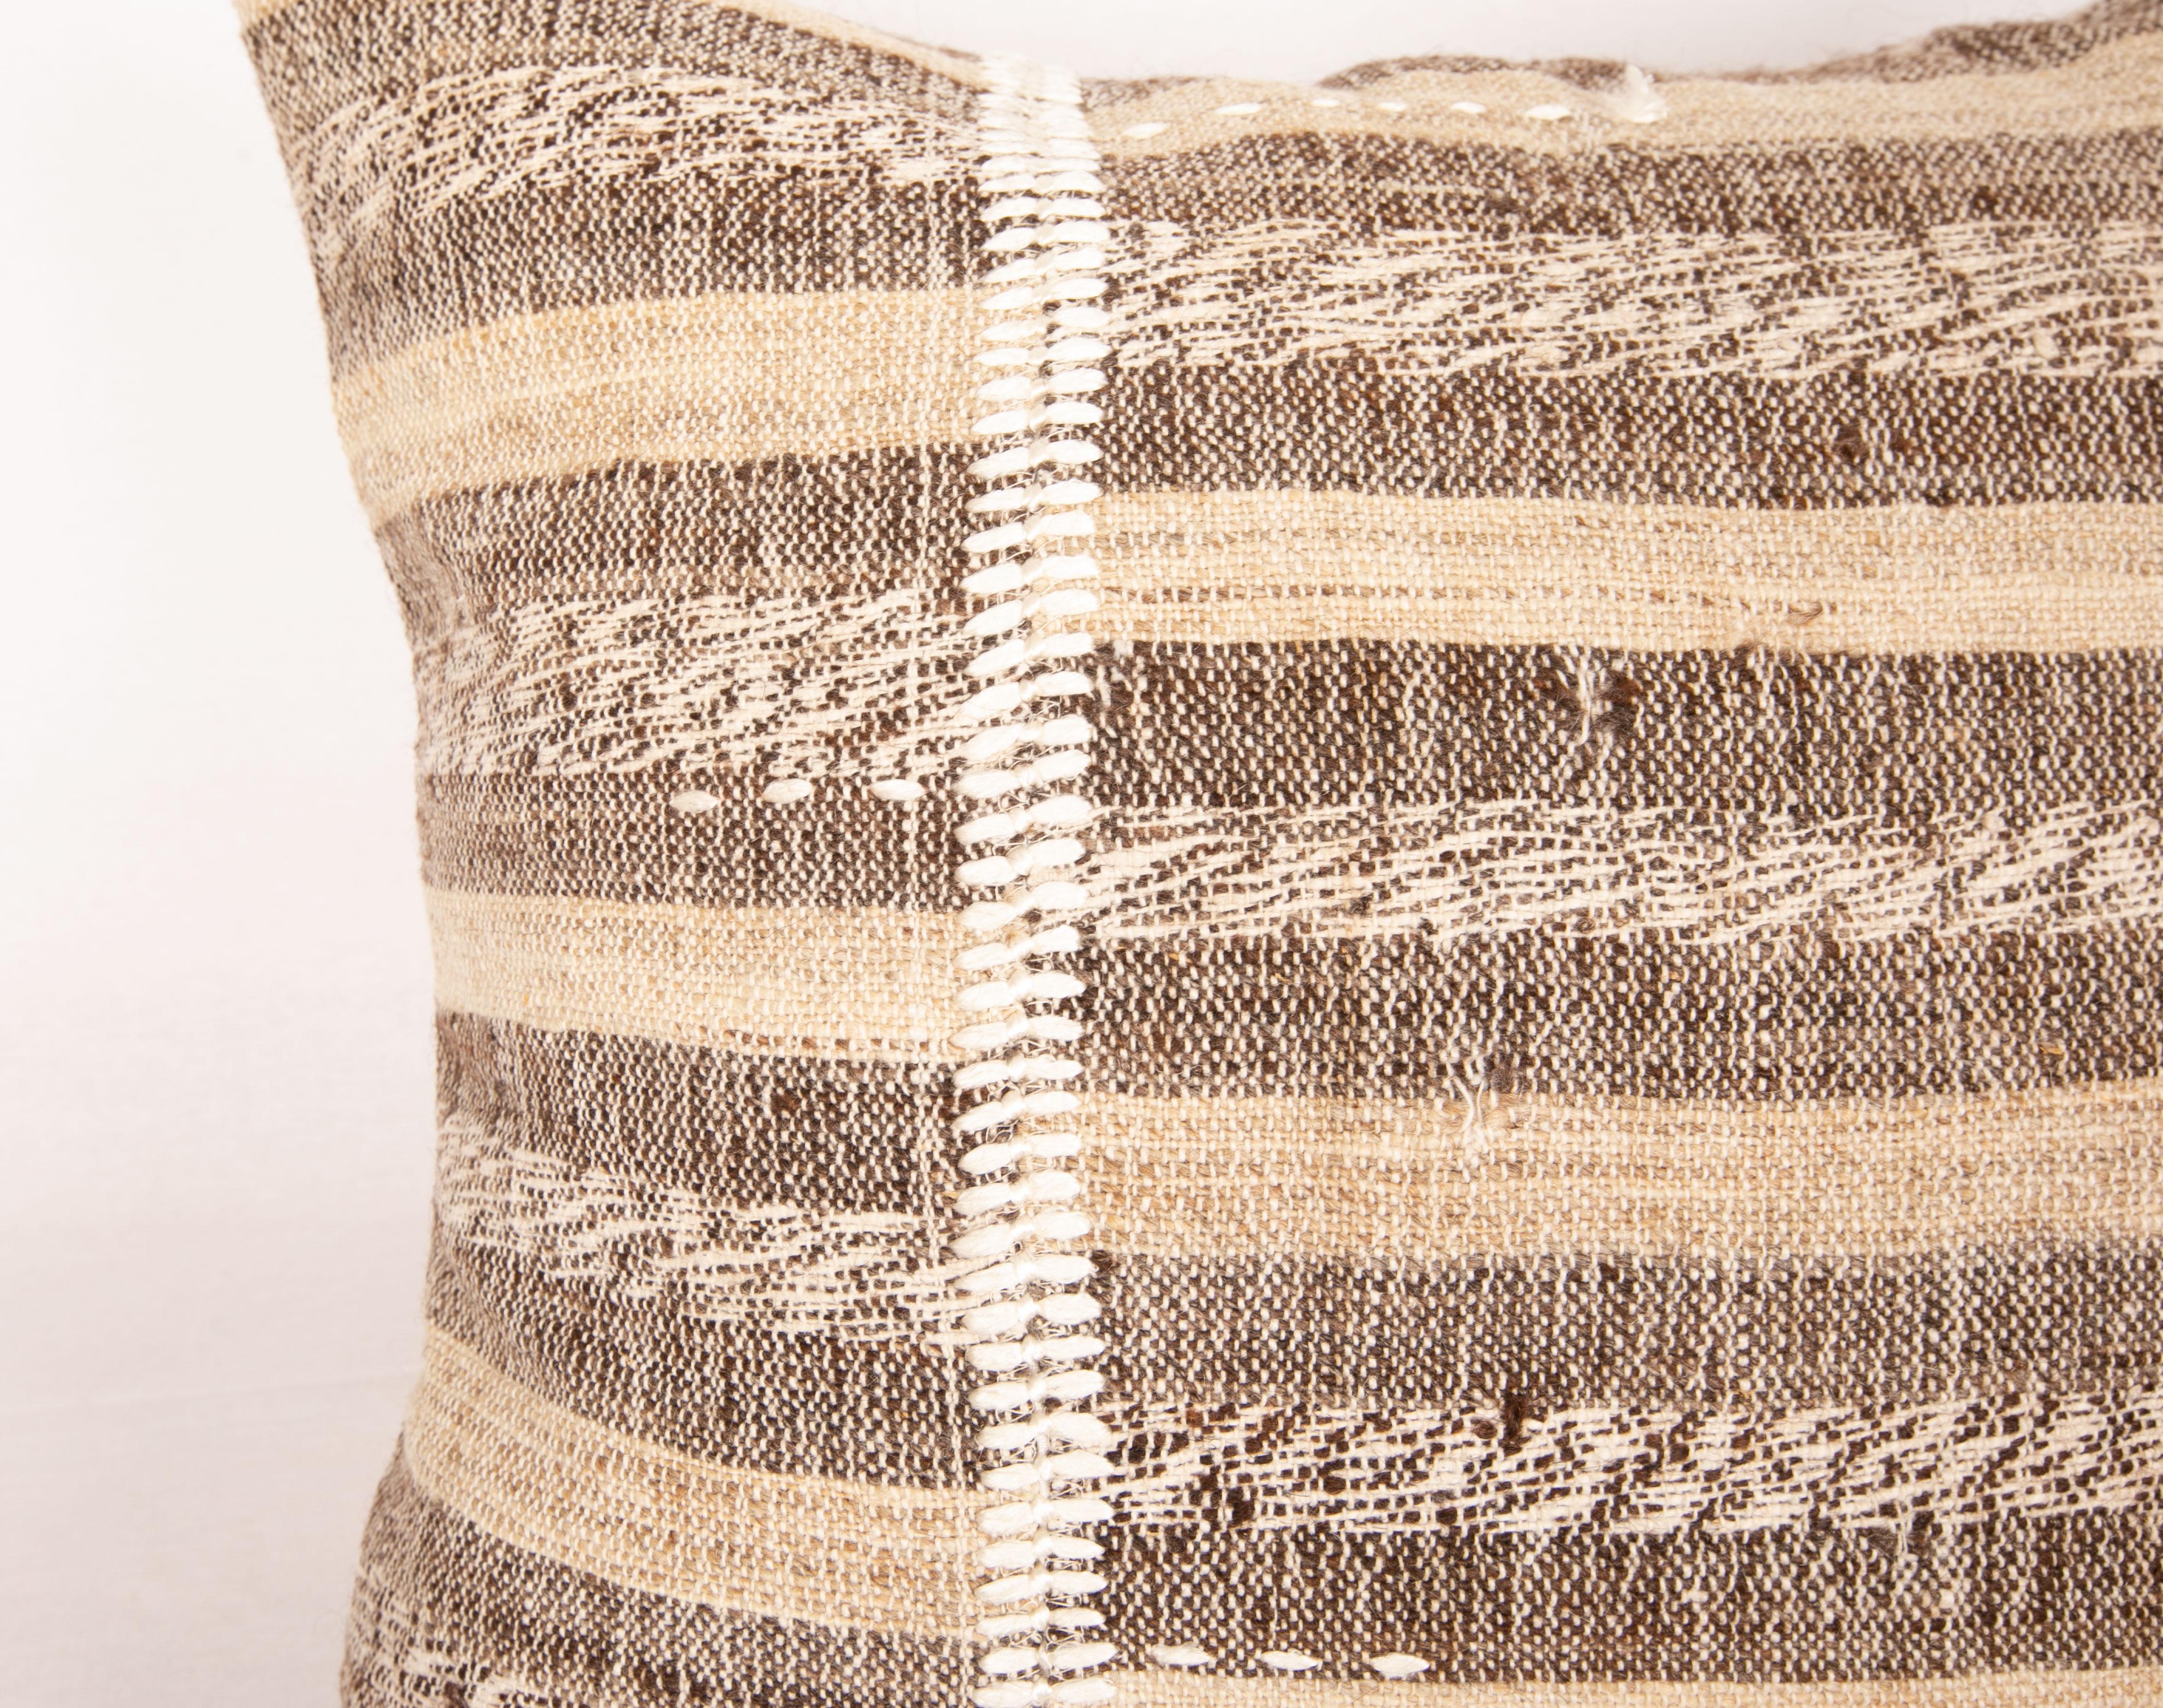 Hand-Woven Pillow Case Made from Rustic Anatolian Vintage Kilim For Sale